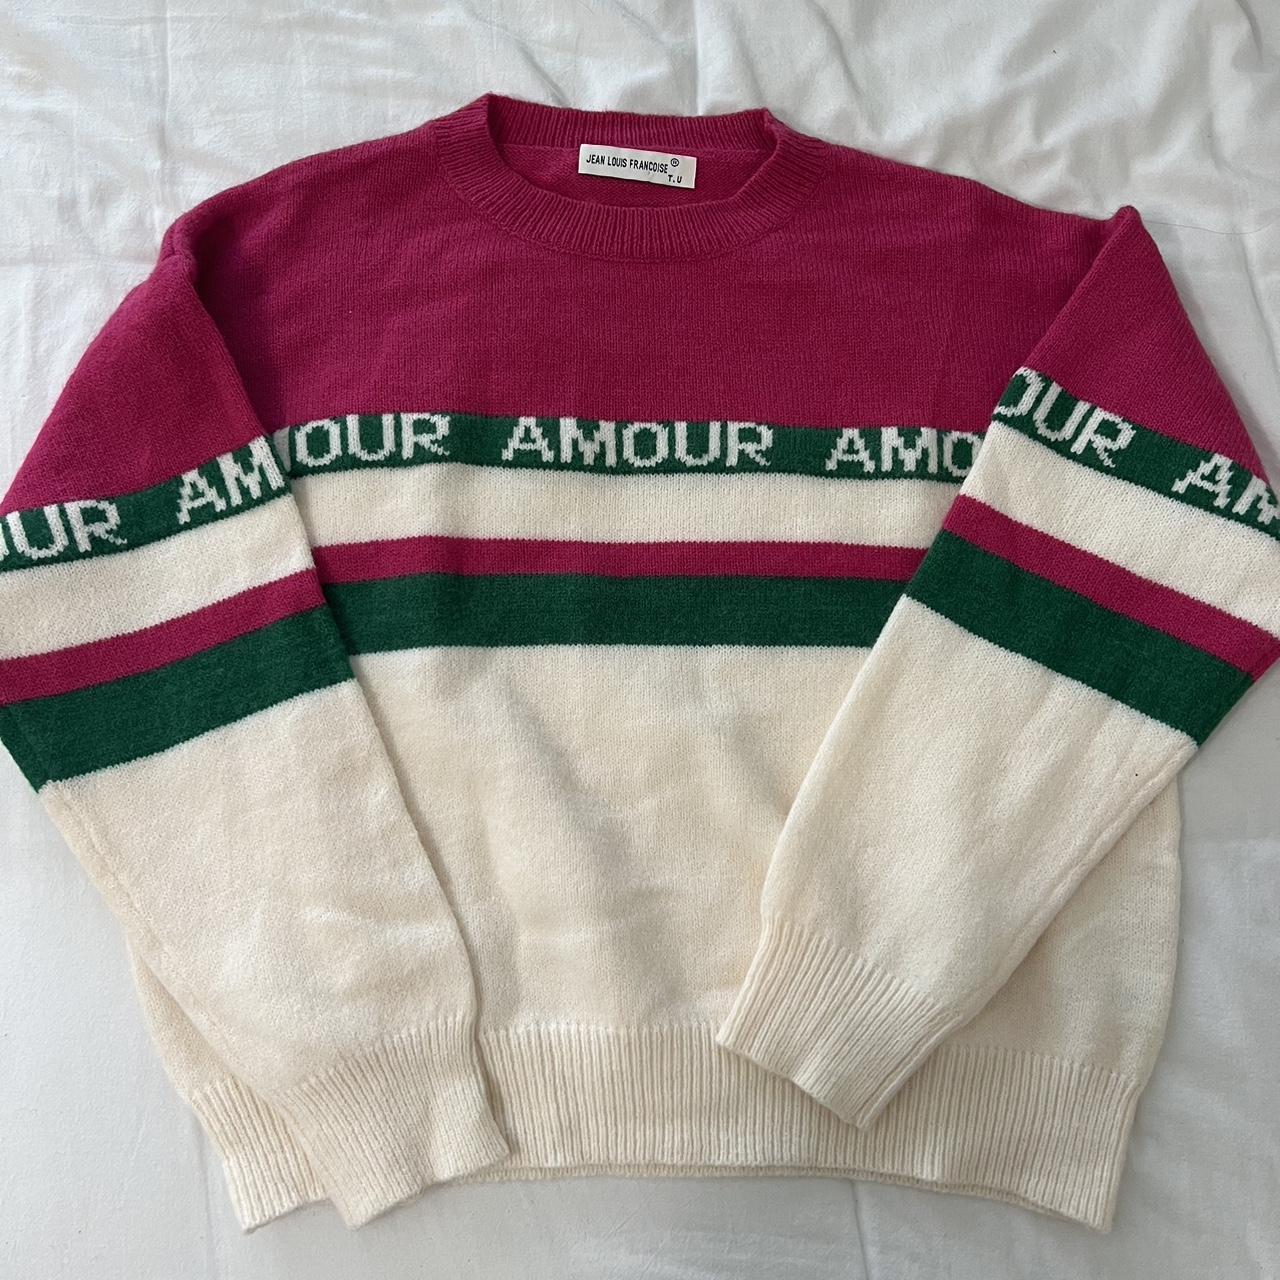 item listed by urmomhasbetterclothes